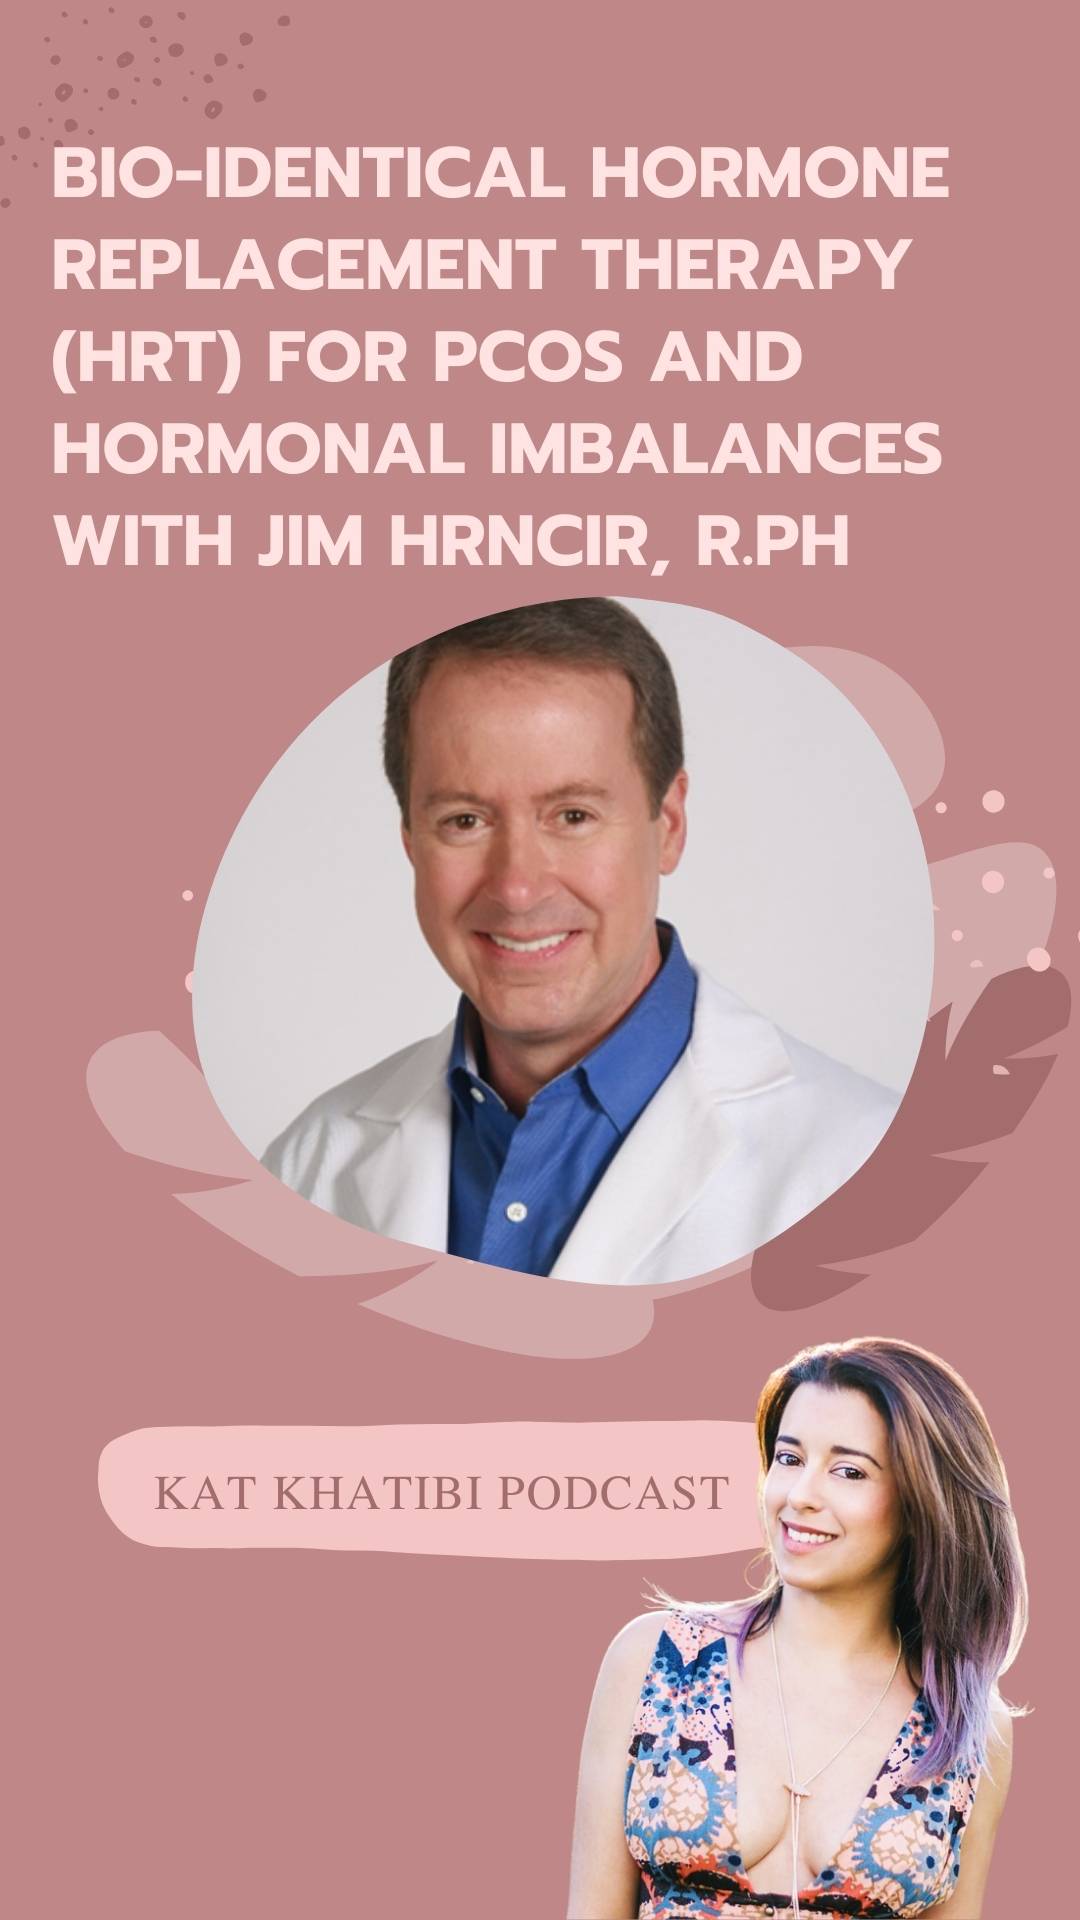 Bio-Identical Hormone Replacement Therapy (HRT) for PCOS and Hormonal Imbalances with Jim Hrncir, R.Ph